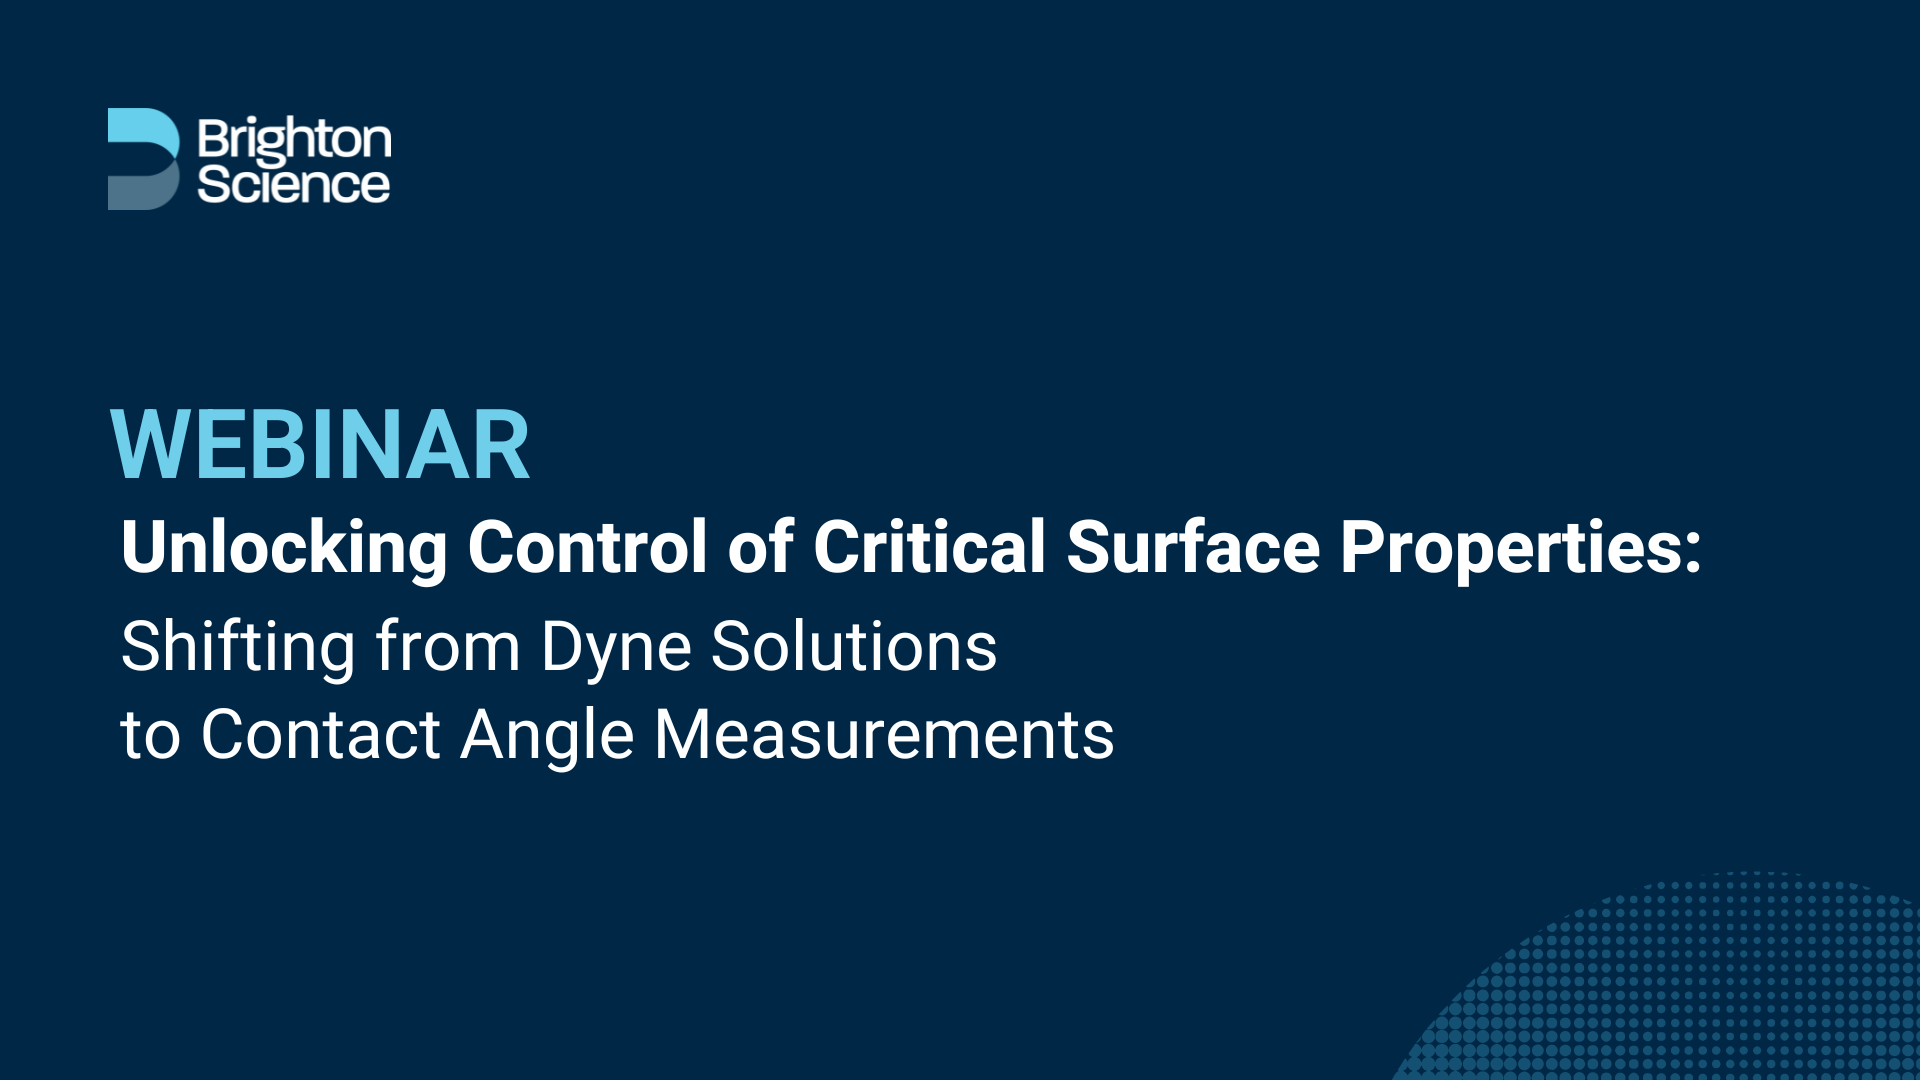 Webinar: Shifting from Dyne Solutions to Contact Angle Measurements